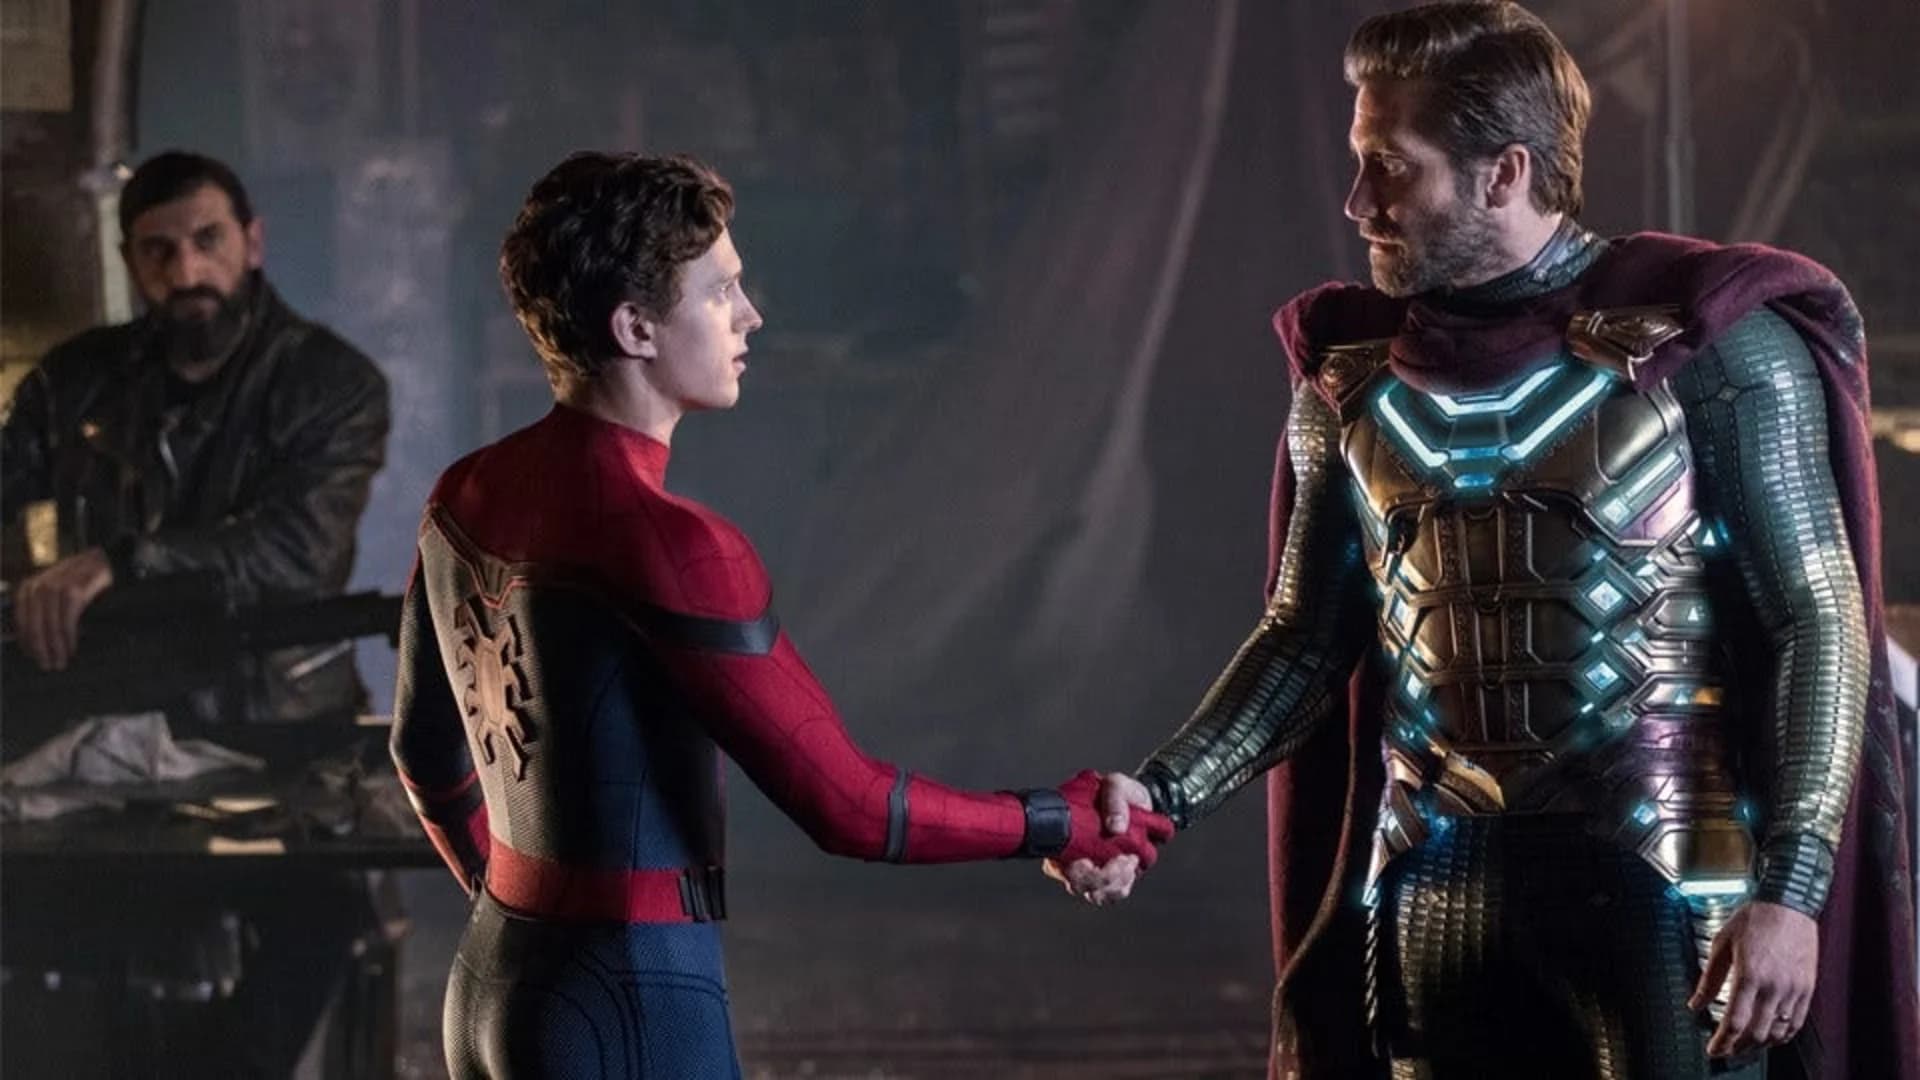 Staff Picks – "Spider-Man: Far From Home" swings into theaters